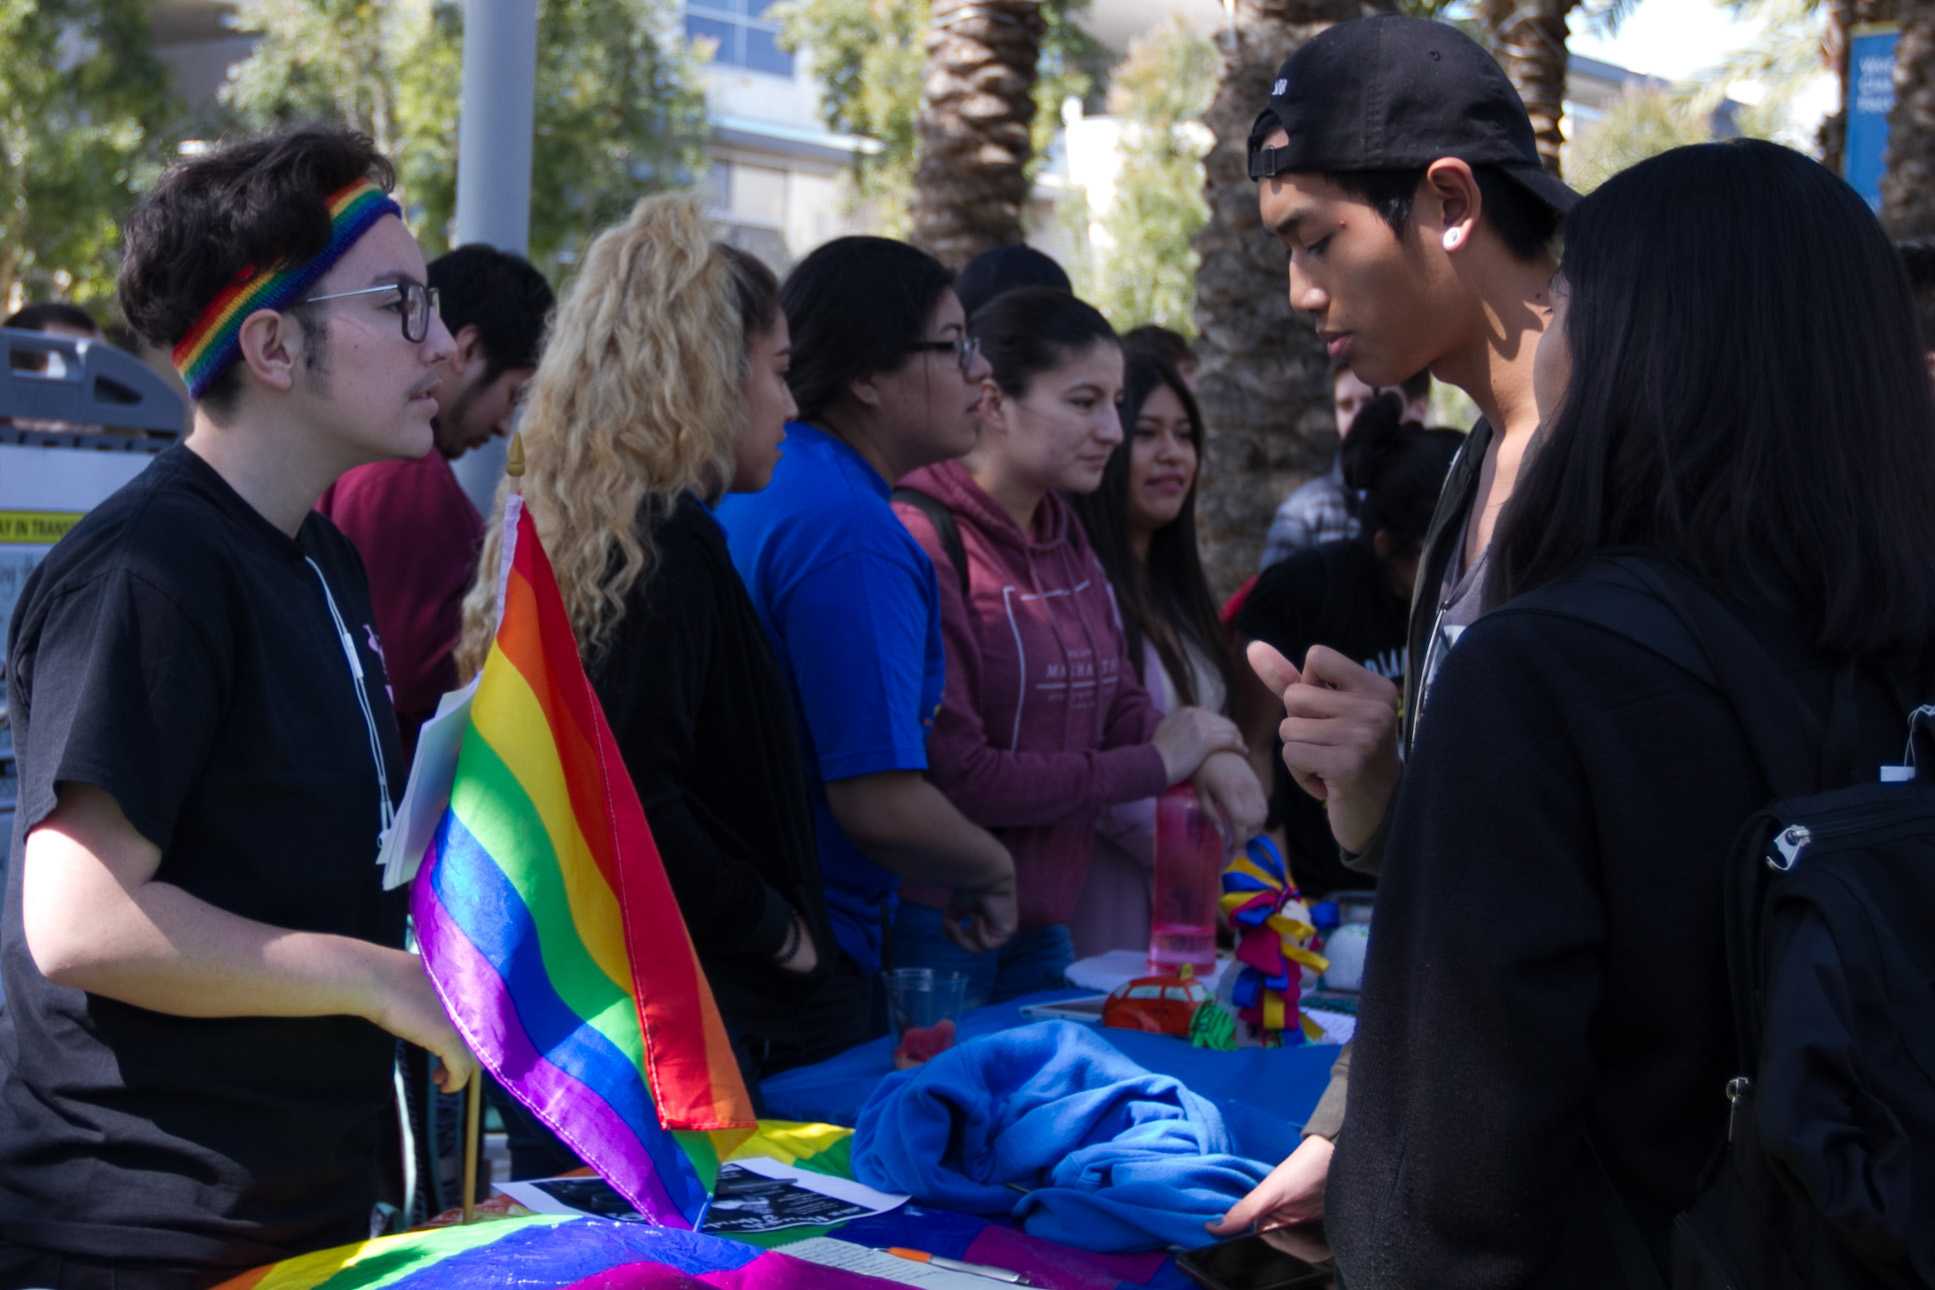  Mysterie Peña (left), president of the GSA talks to Tommy Pathammavong (right) about what he can expect upon joining the club at Club Awareness Day at Santa Monica College in Santa Monica California on March 14, 2017 (Photo By: Zane Meyer) 